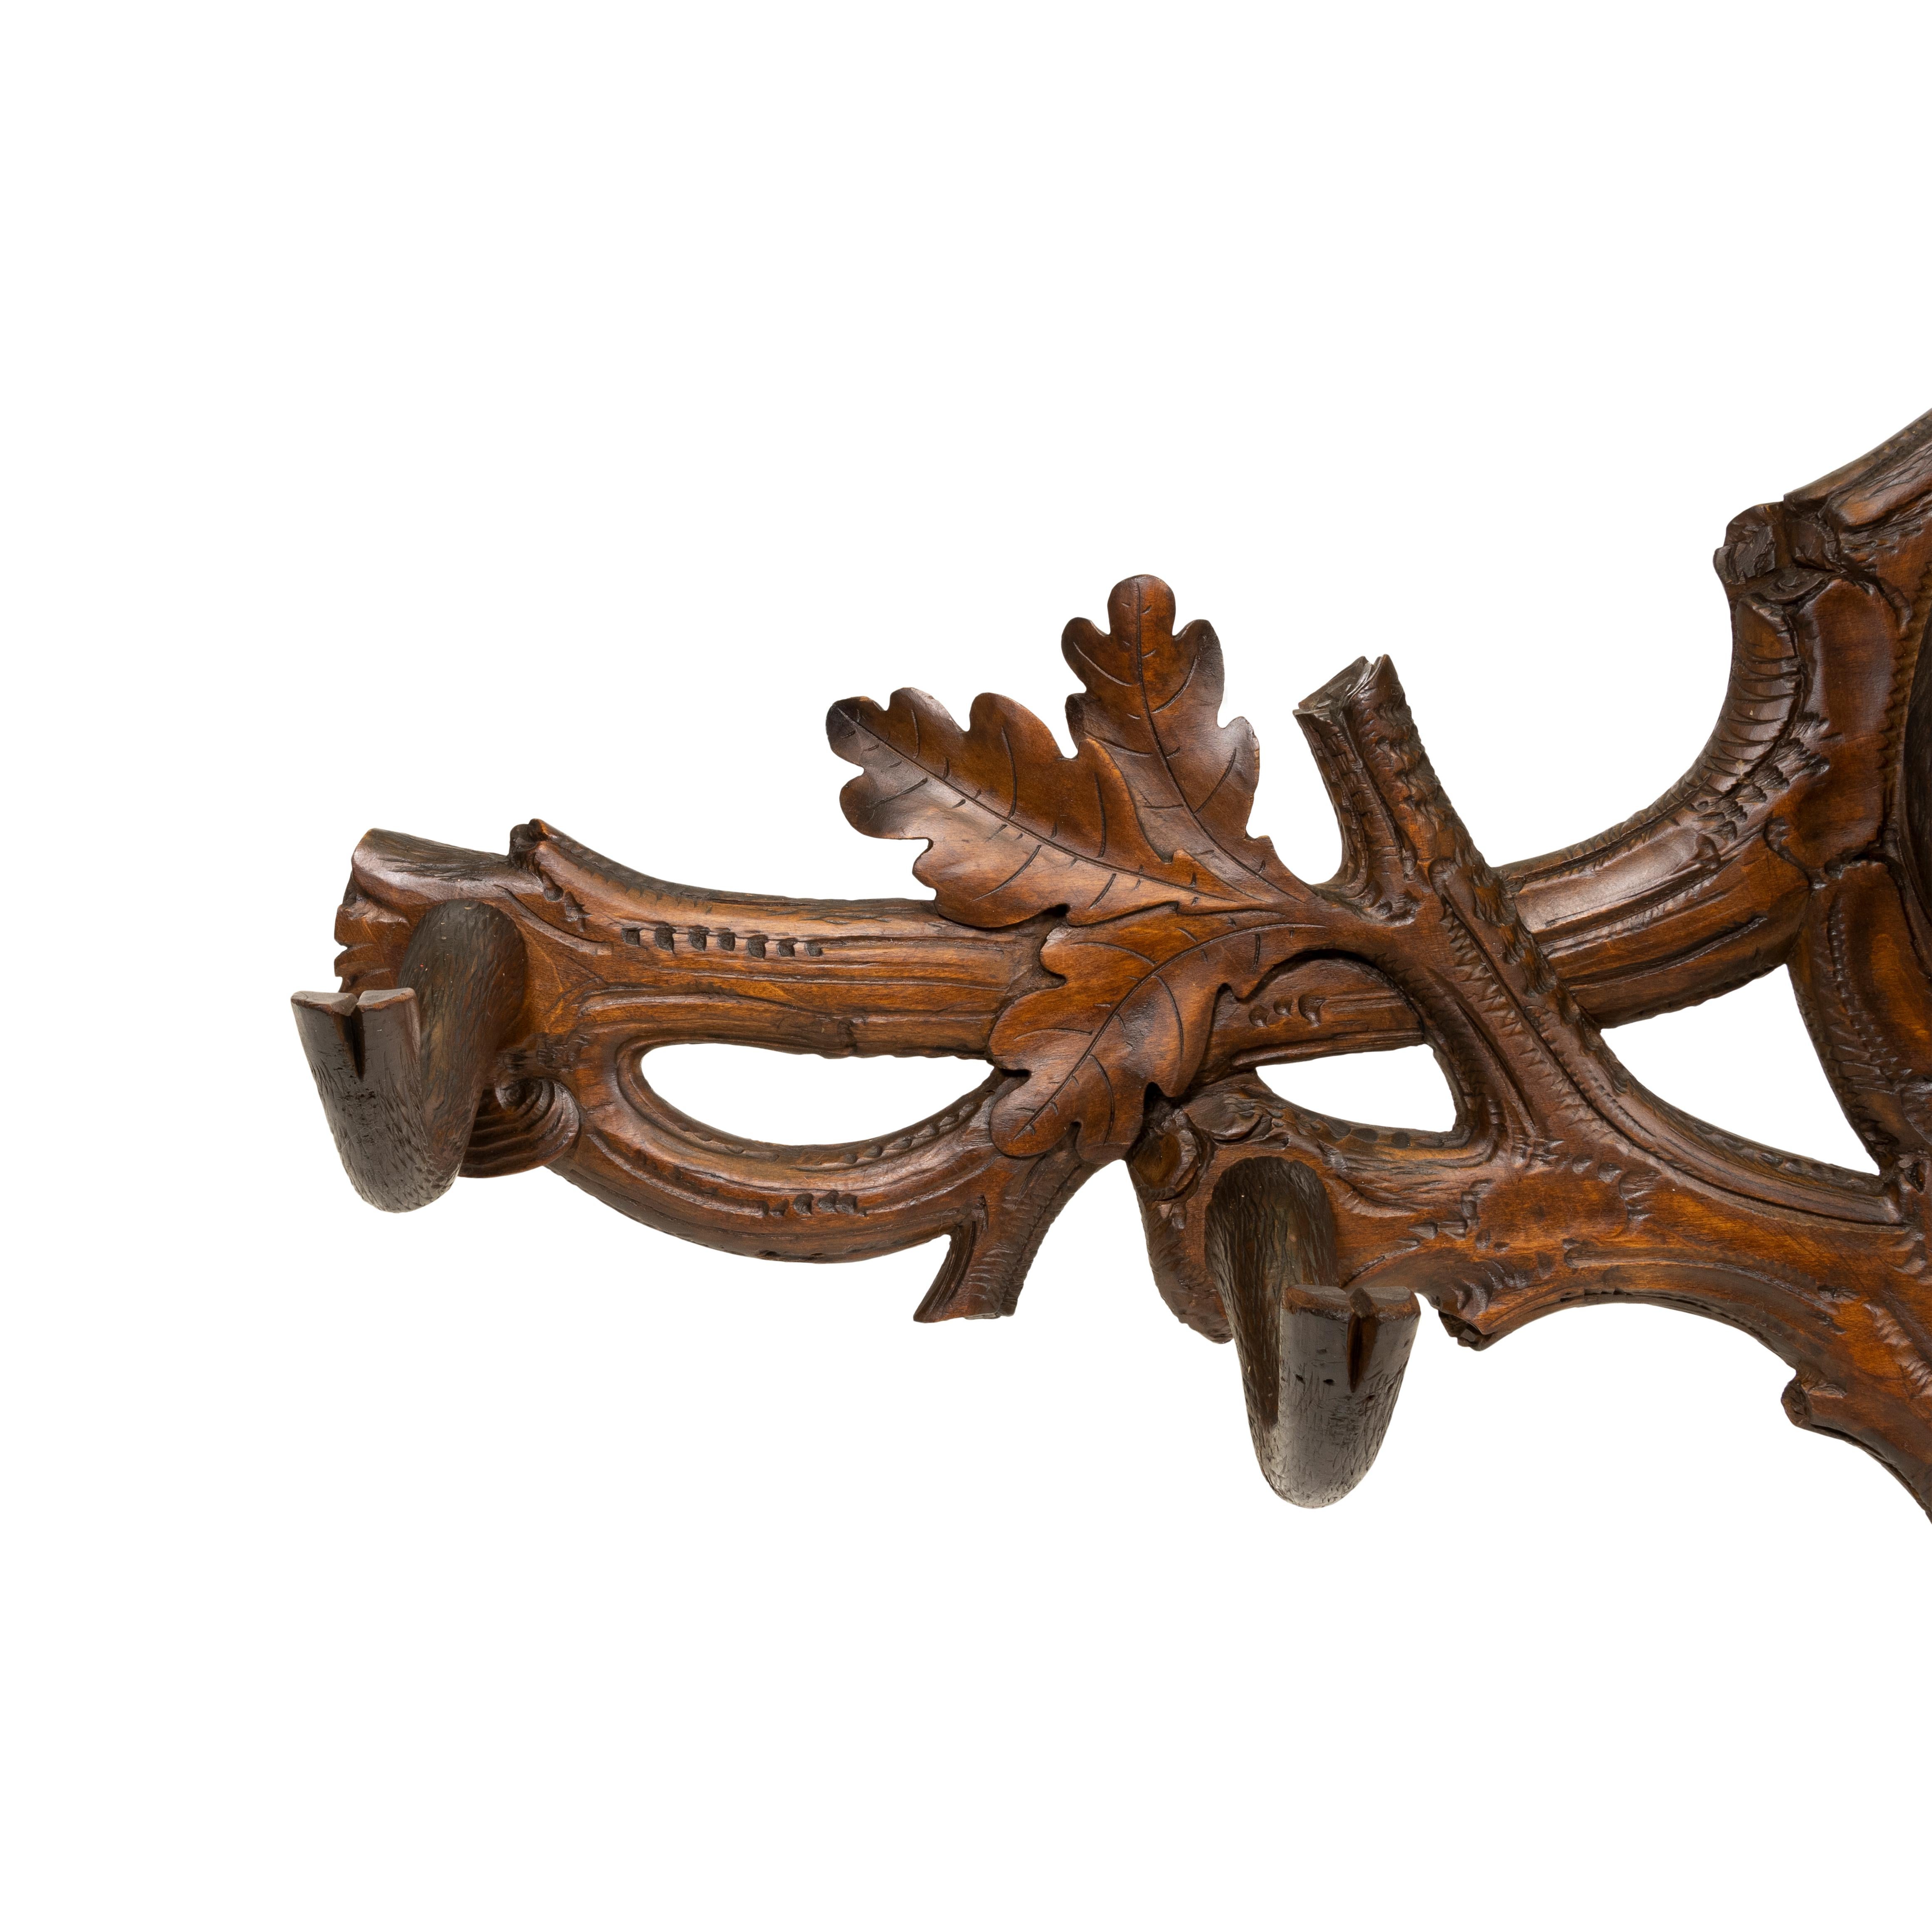 Swiss Black Forest wall mount carved coat rack with chamois carving having real horns, glass eyes.
In the 1800’s the wood carving industry of Switzerland started in the town of Brienz. By the end of the 1800’s it had become the driving force for